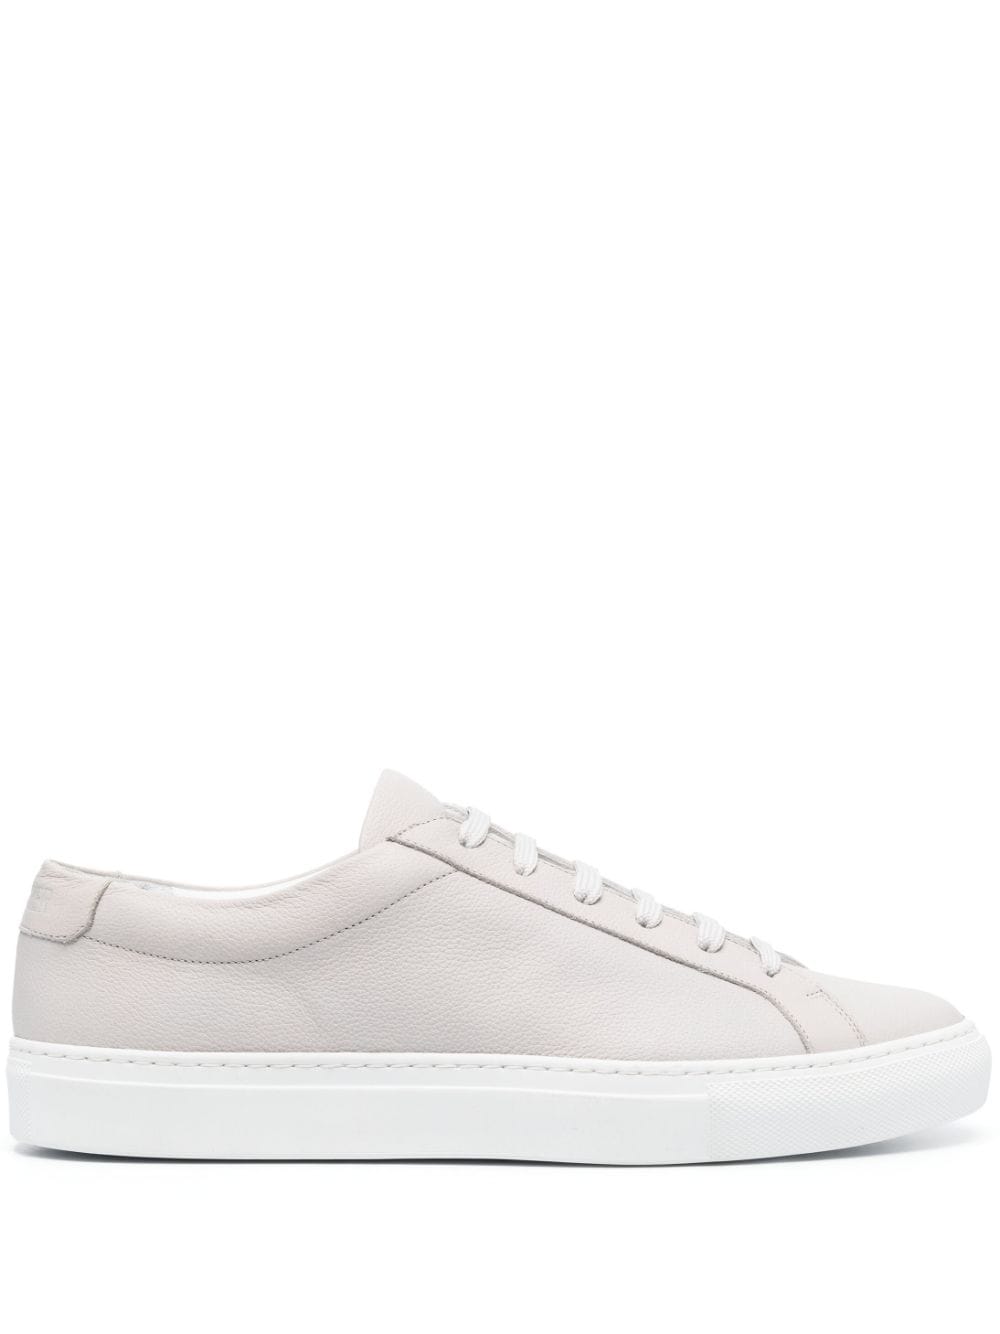 Moorer lace-up leather sneakers - Grey von Moorer